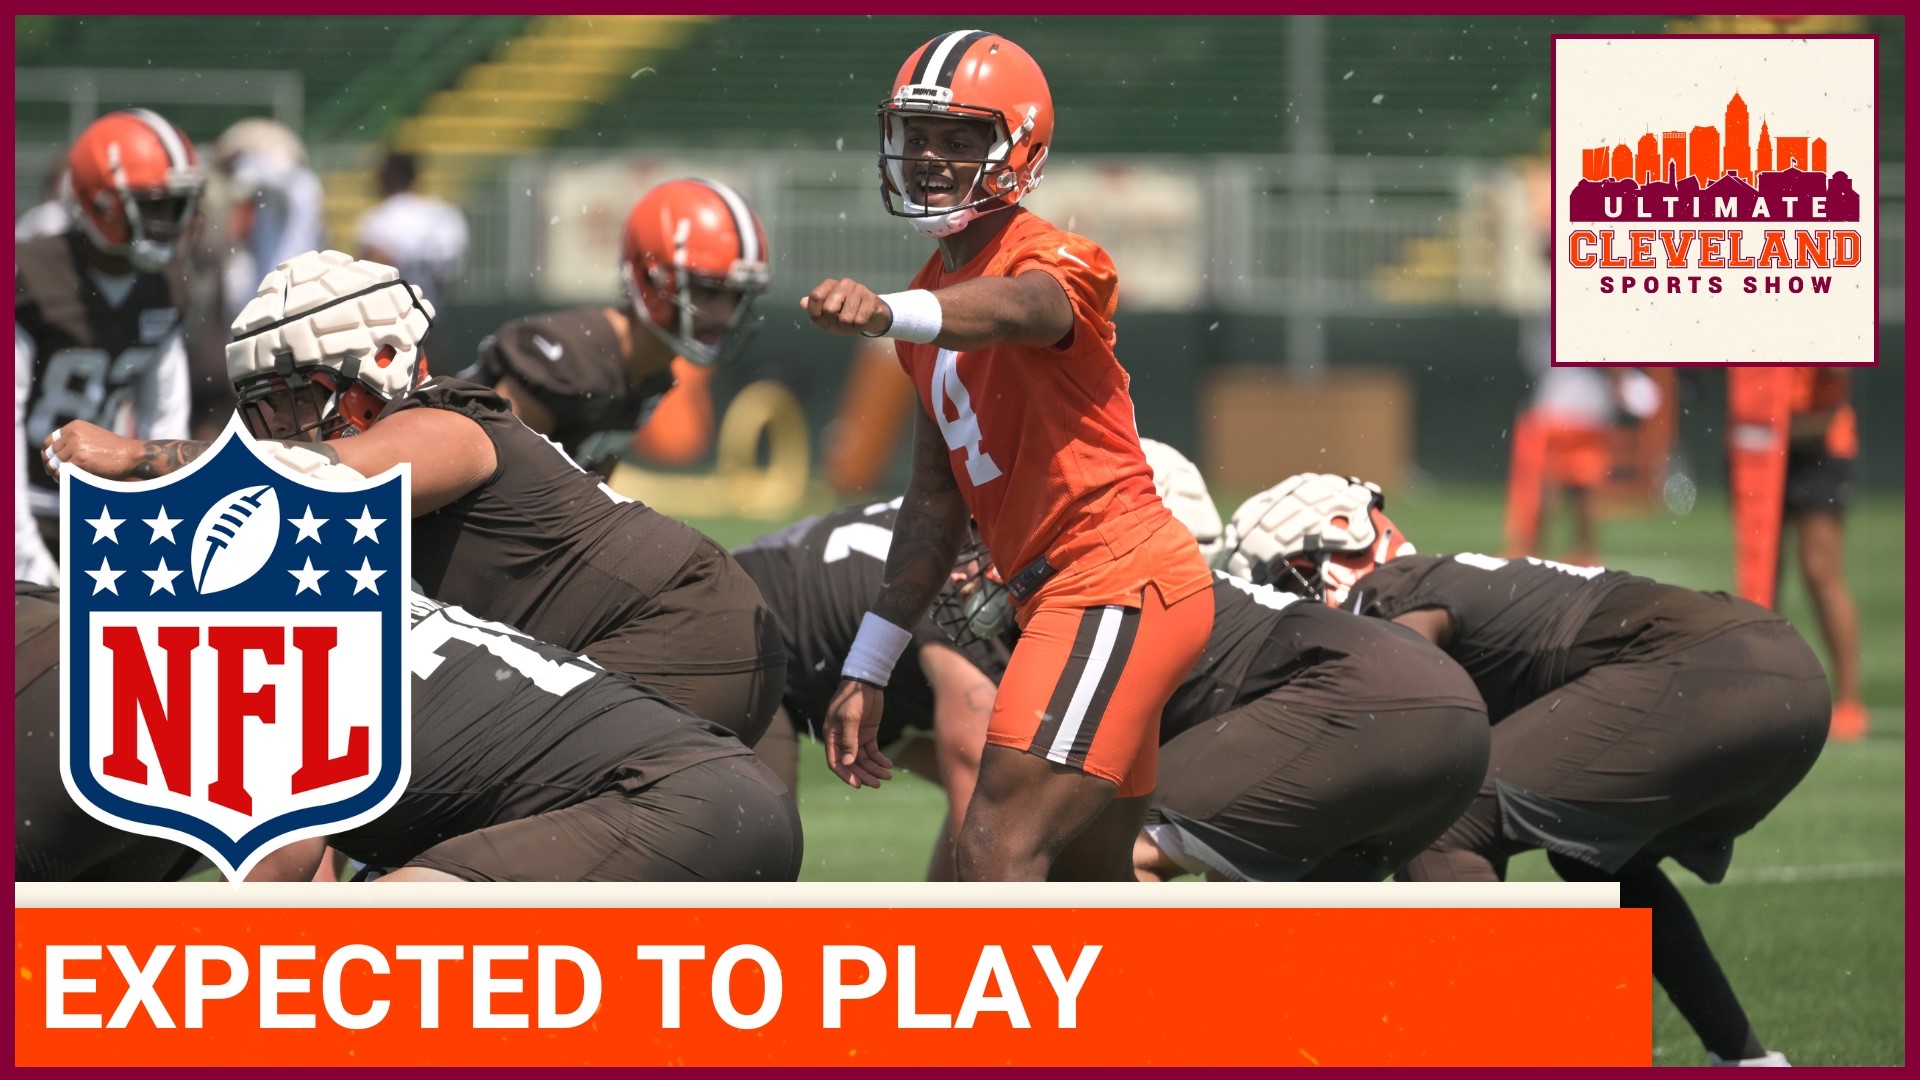 Deshaun Watson doesn't know the plan yet for the preseason opener, but Aditi Kinkhabwala would be shocked if he didn't play for the Browns.